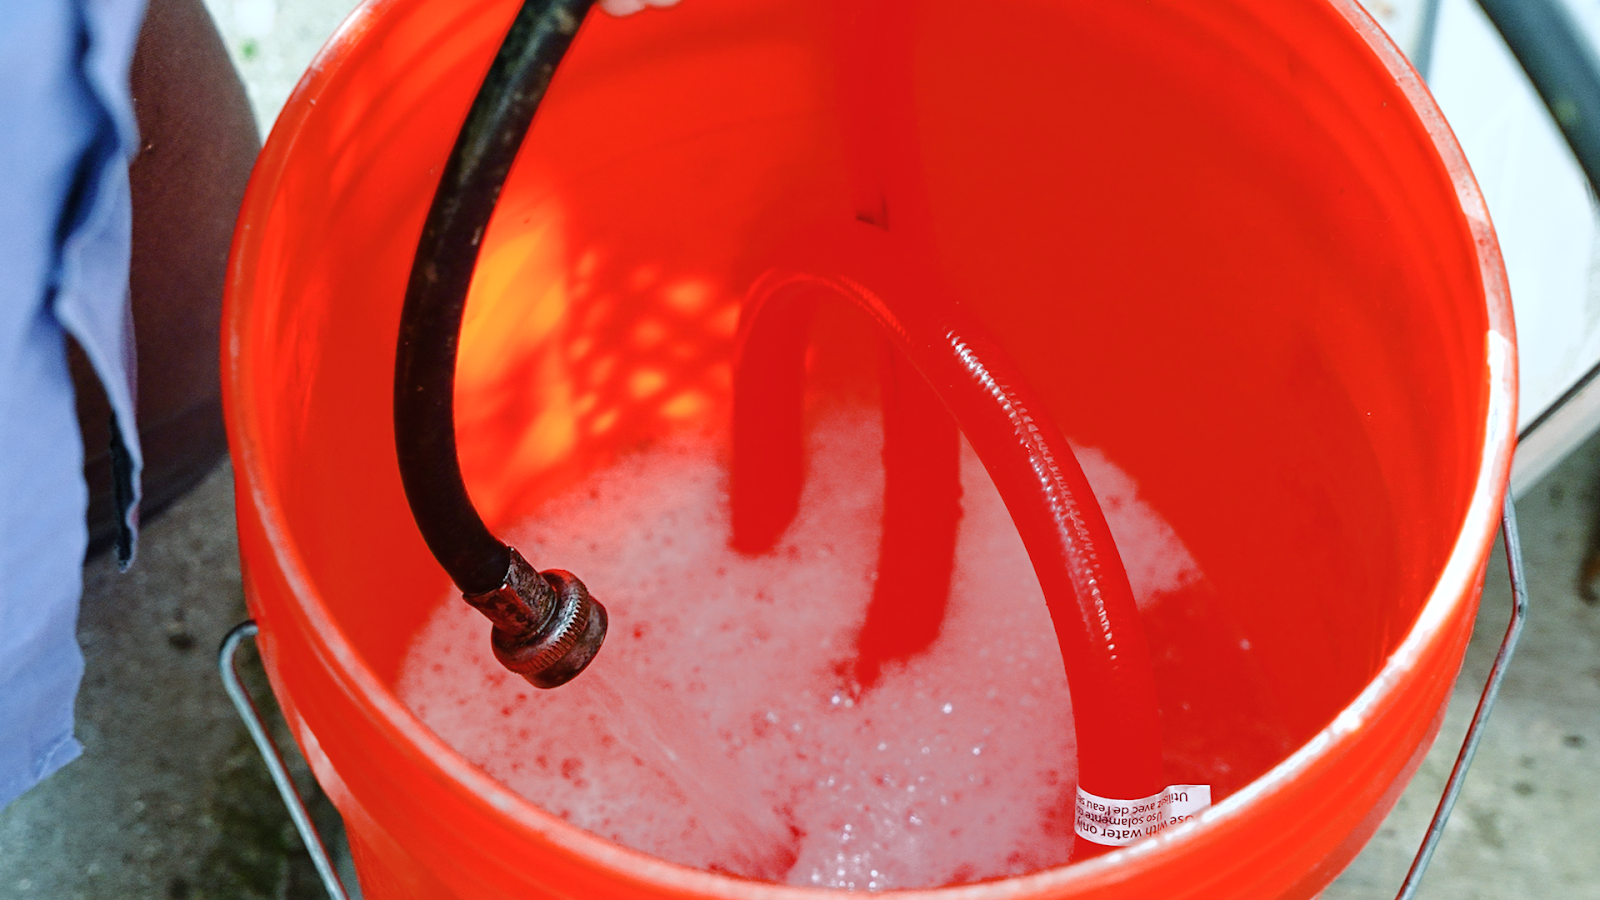 The image shows a black hose draining water from the tankless water heater into a 5-gallon bucket. 